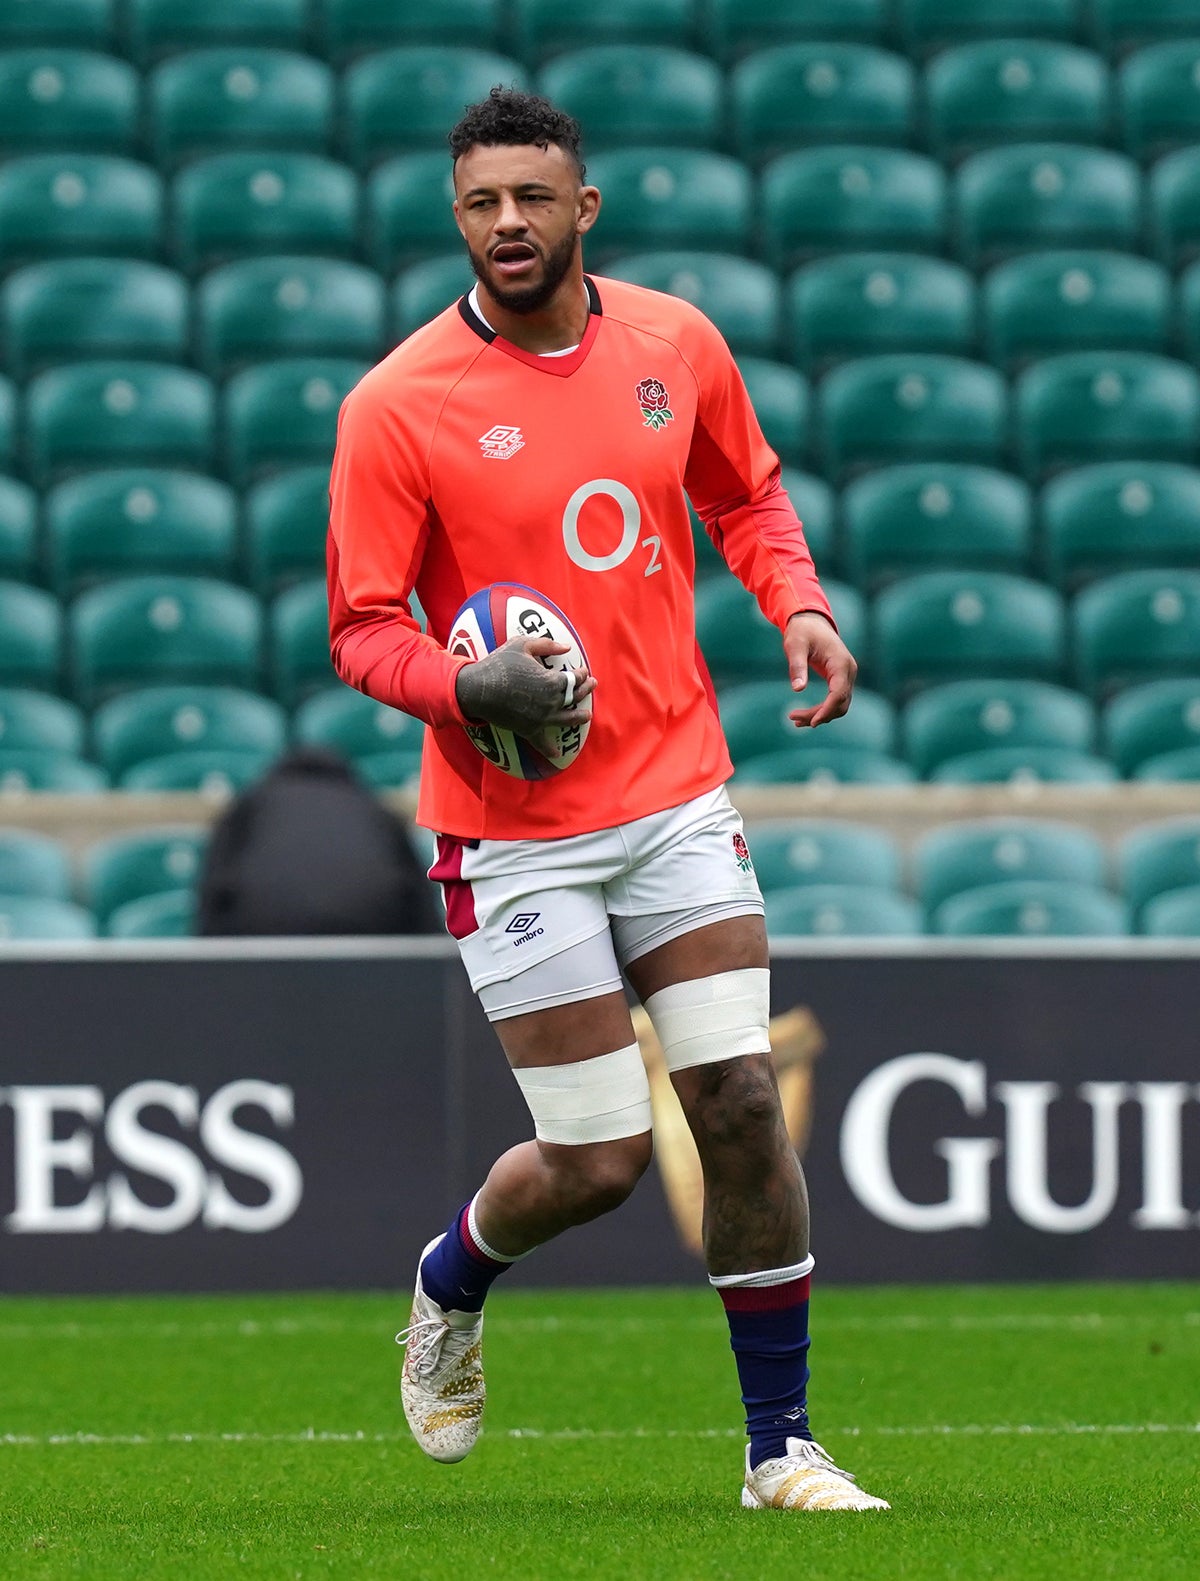 Courtney Lawes calls for patience as England build towards 2023 World Cup